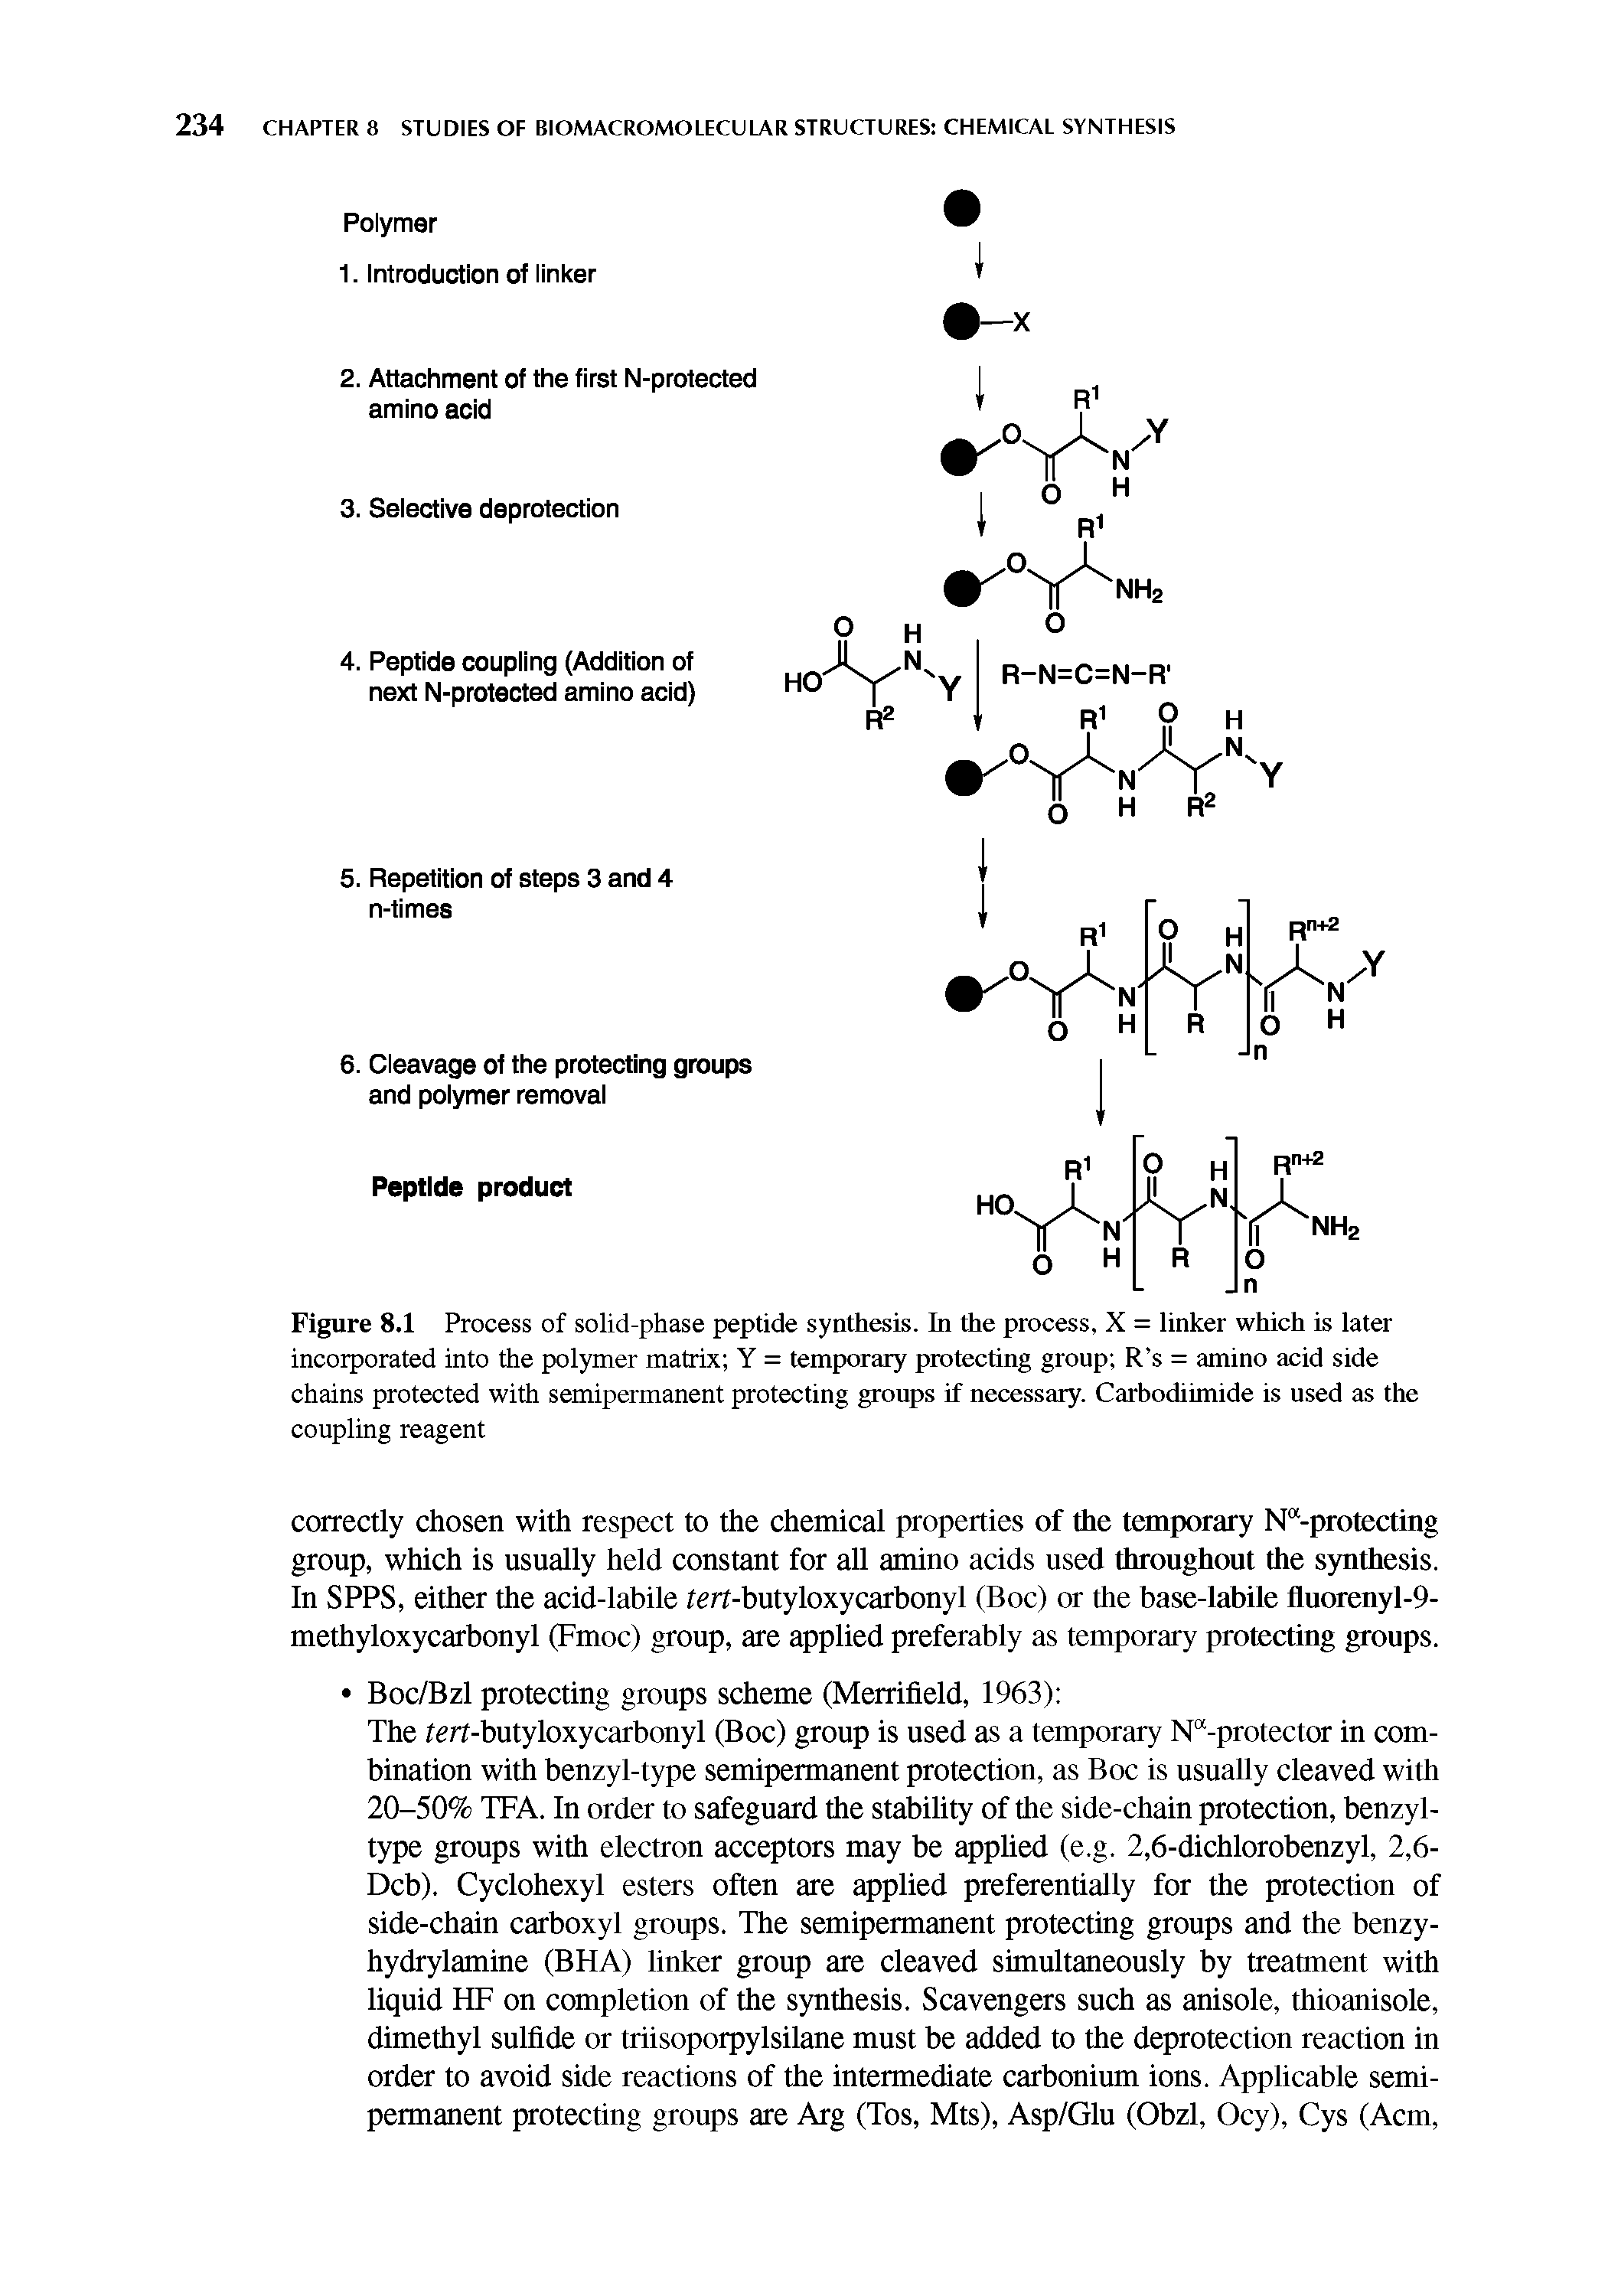 Figure 8.1 Process of solid-phase peptide synthesis. In the process, X = linker which is later incorporated into the polymer matrix Y = temporary protecting group R s = amino acid side chains protected with semipermanent protecting gronps if necessary. Carbodiimide is used as the coupling reagent...